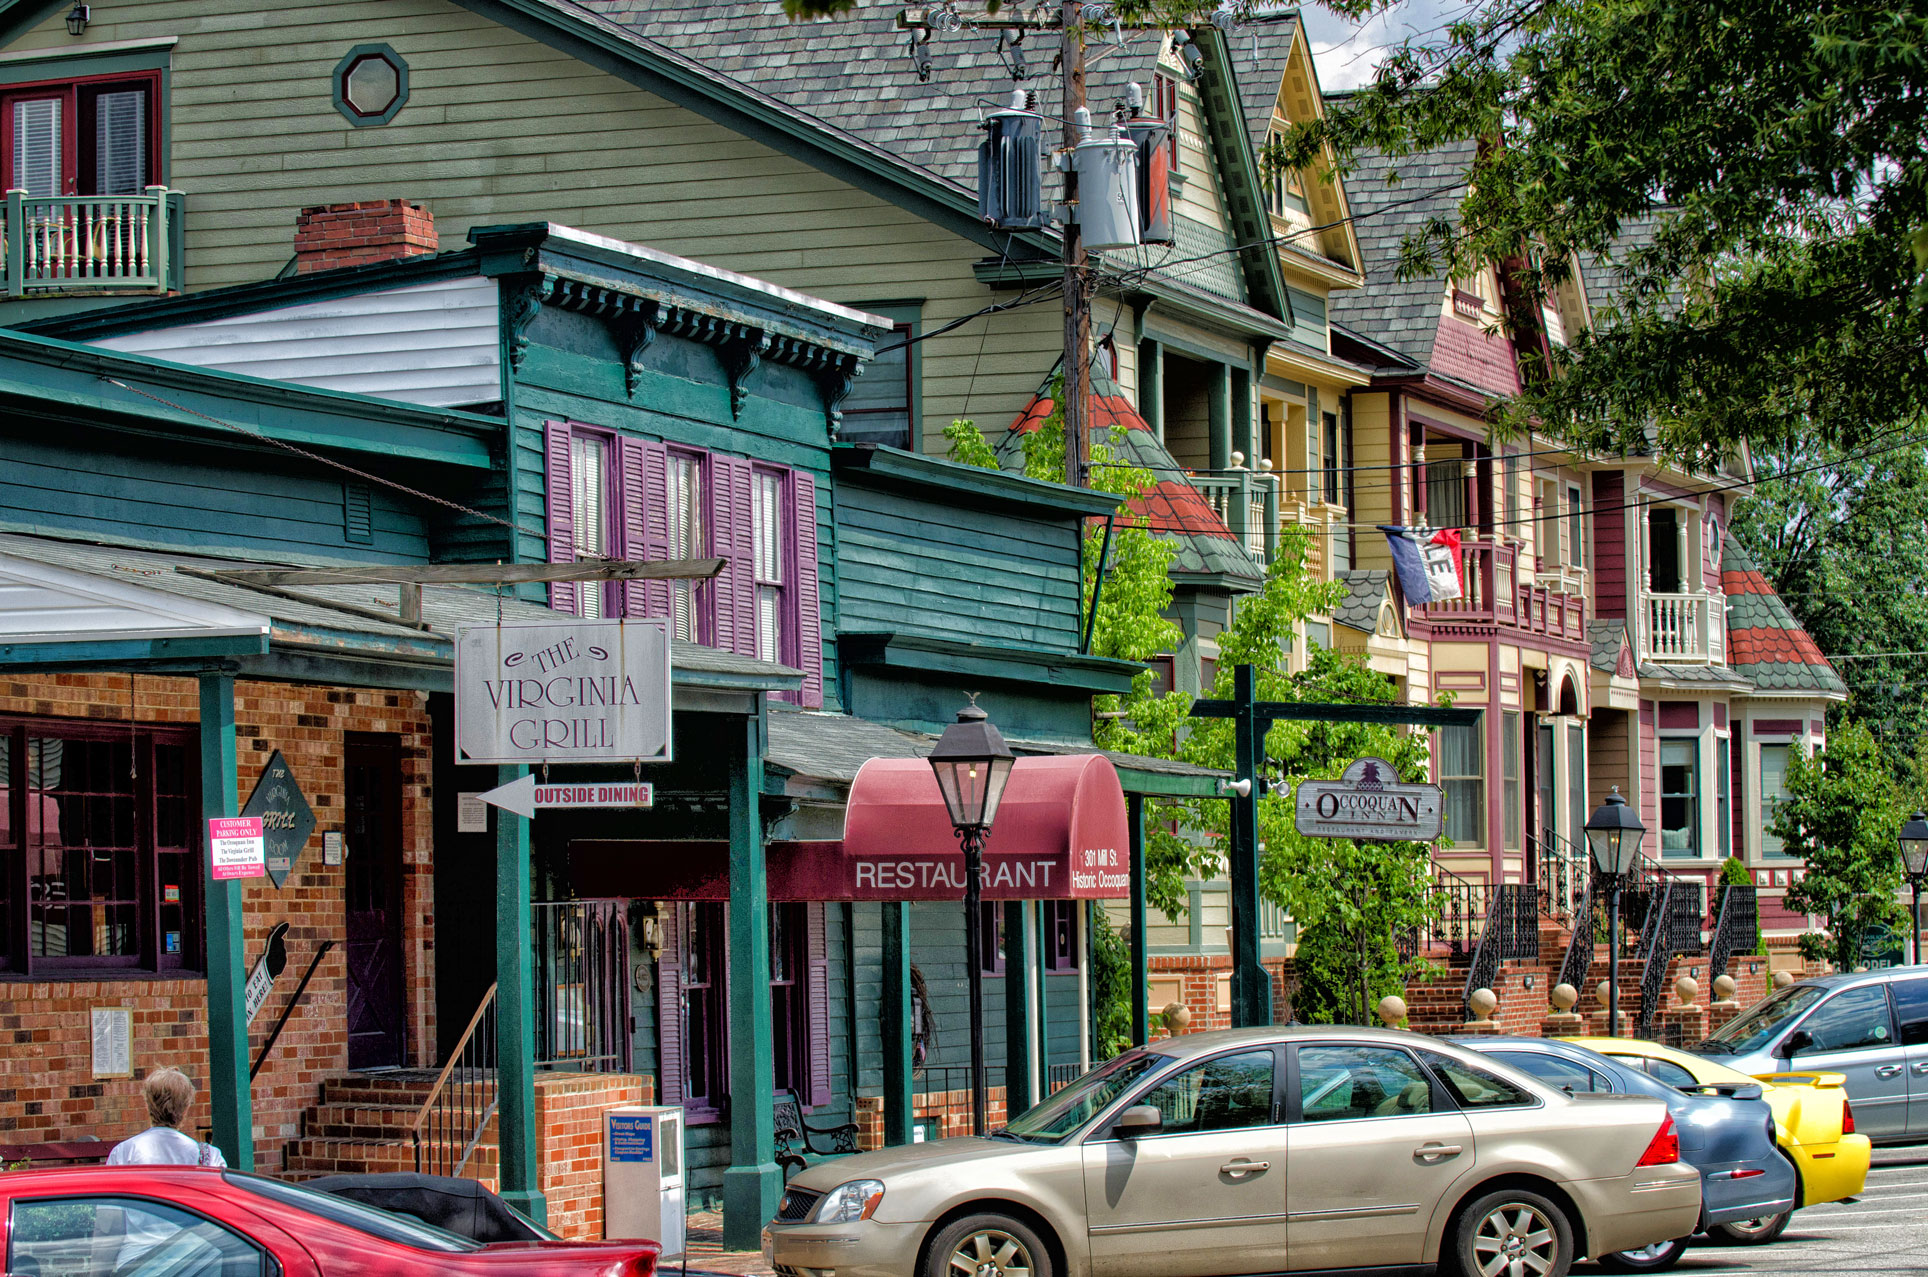 Colorful historic storefronts with cars parked outfront